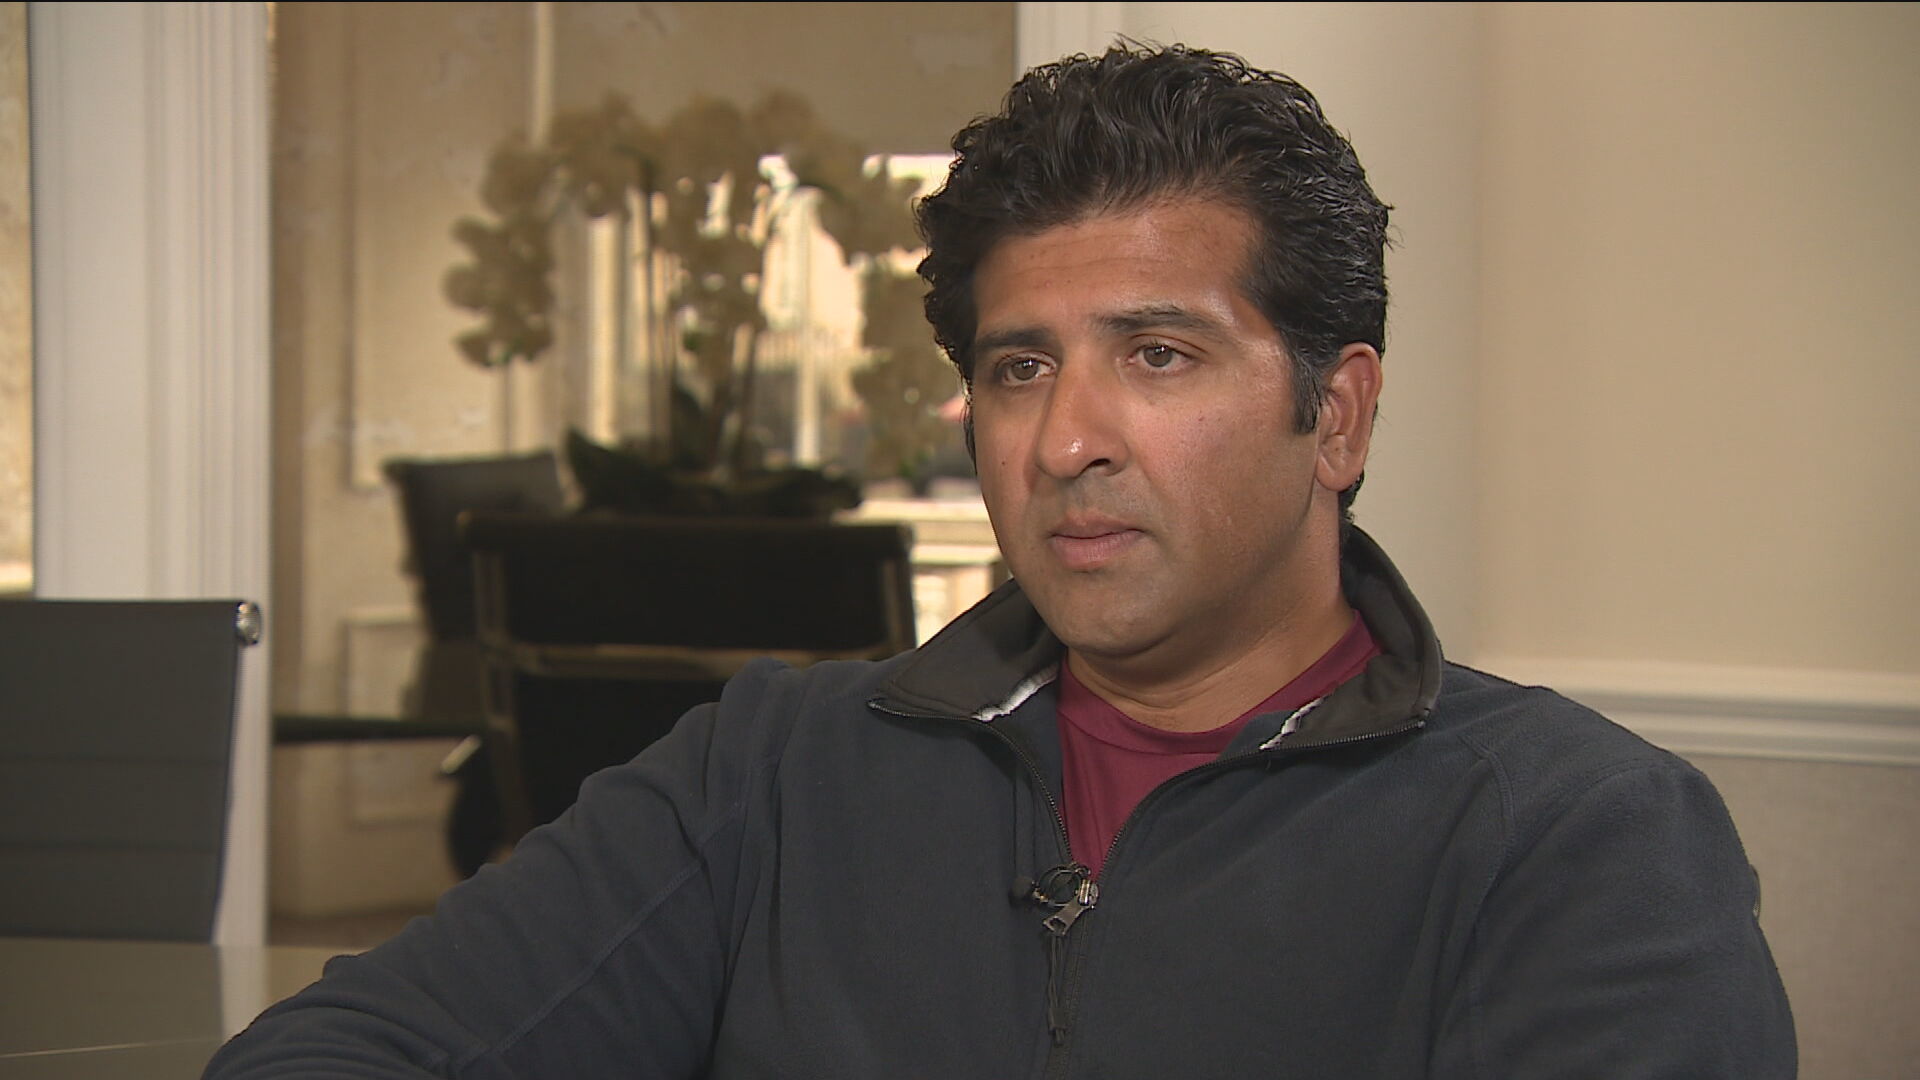 Former Scotland cricketer Majid Haq was among those who made allegations of racist behaviour by Blain. 